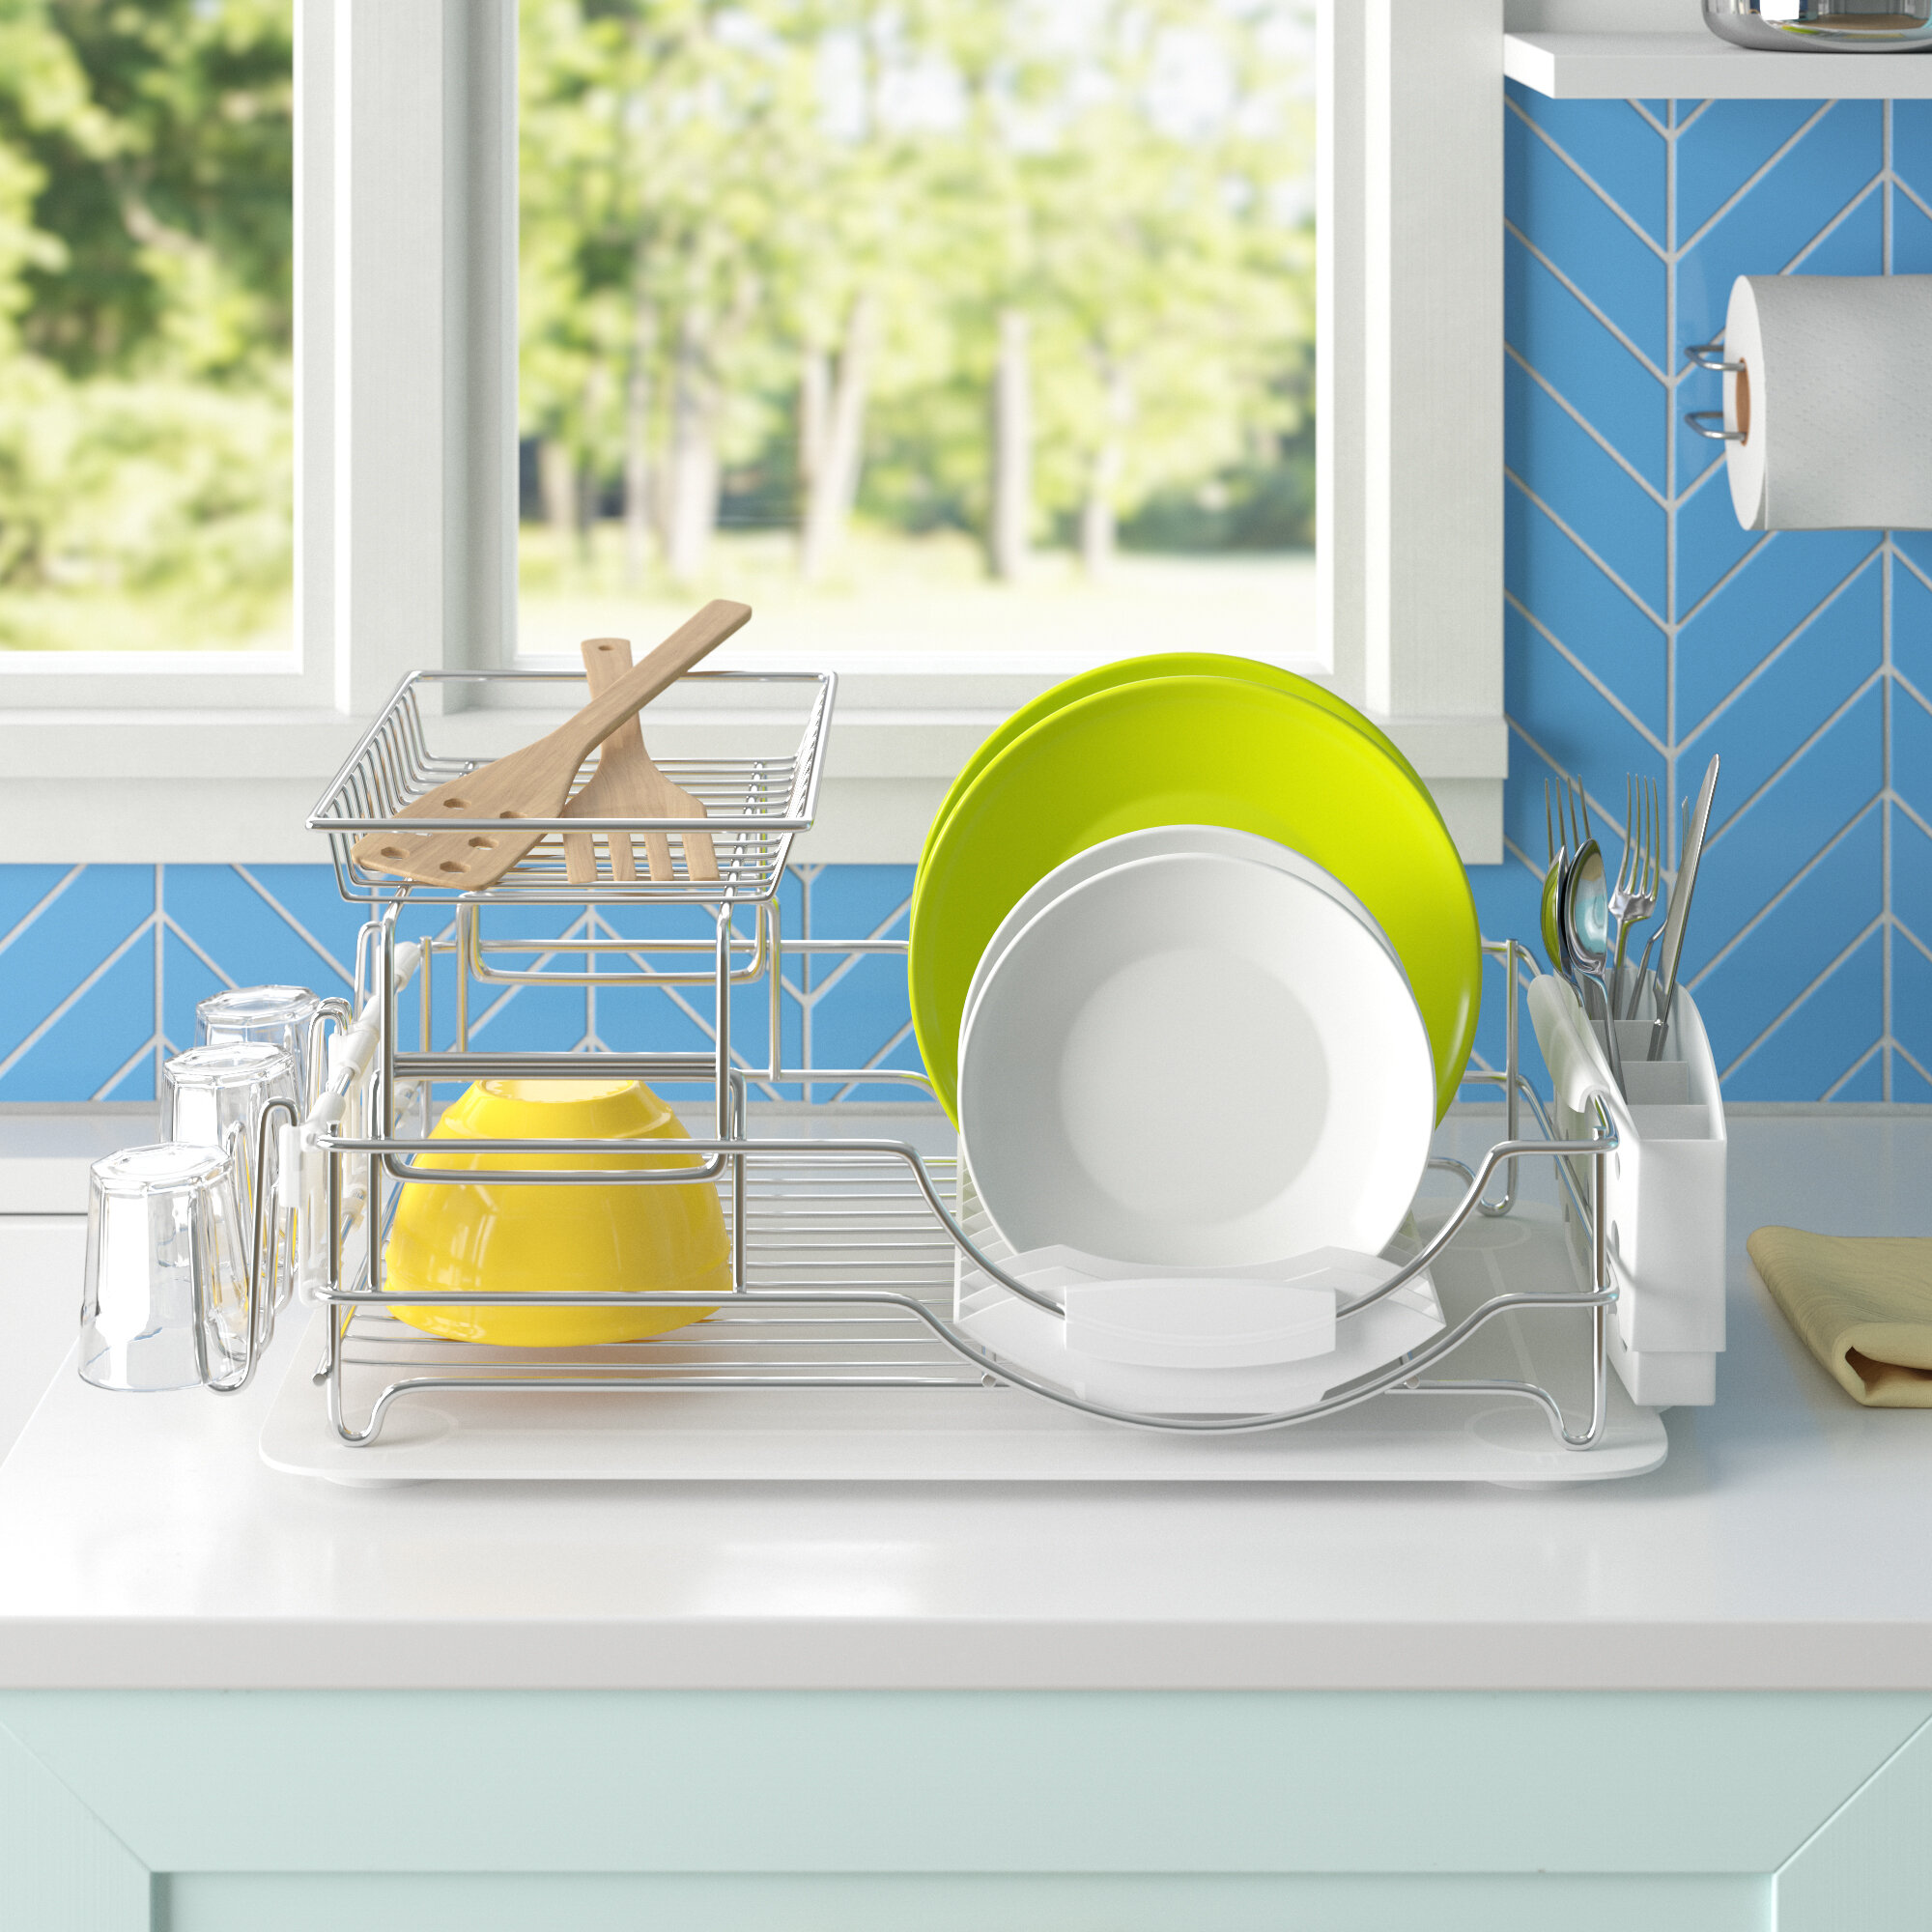 A Good Budget Product for Small Kitchens: The Tub Dish Rack from Umbra